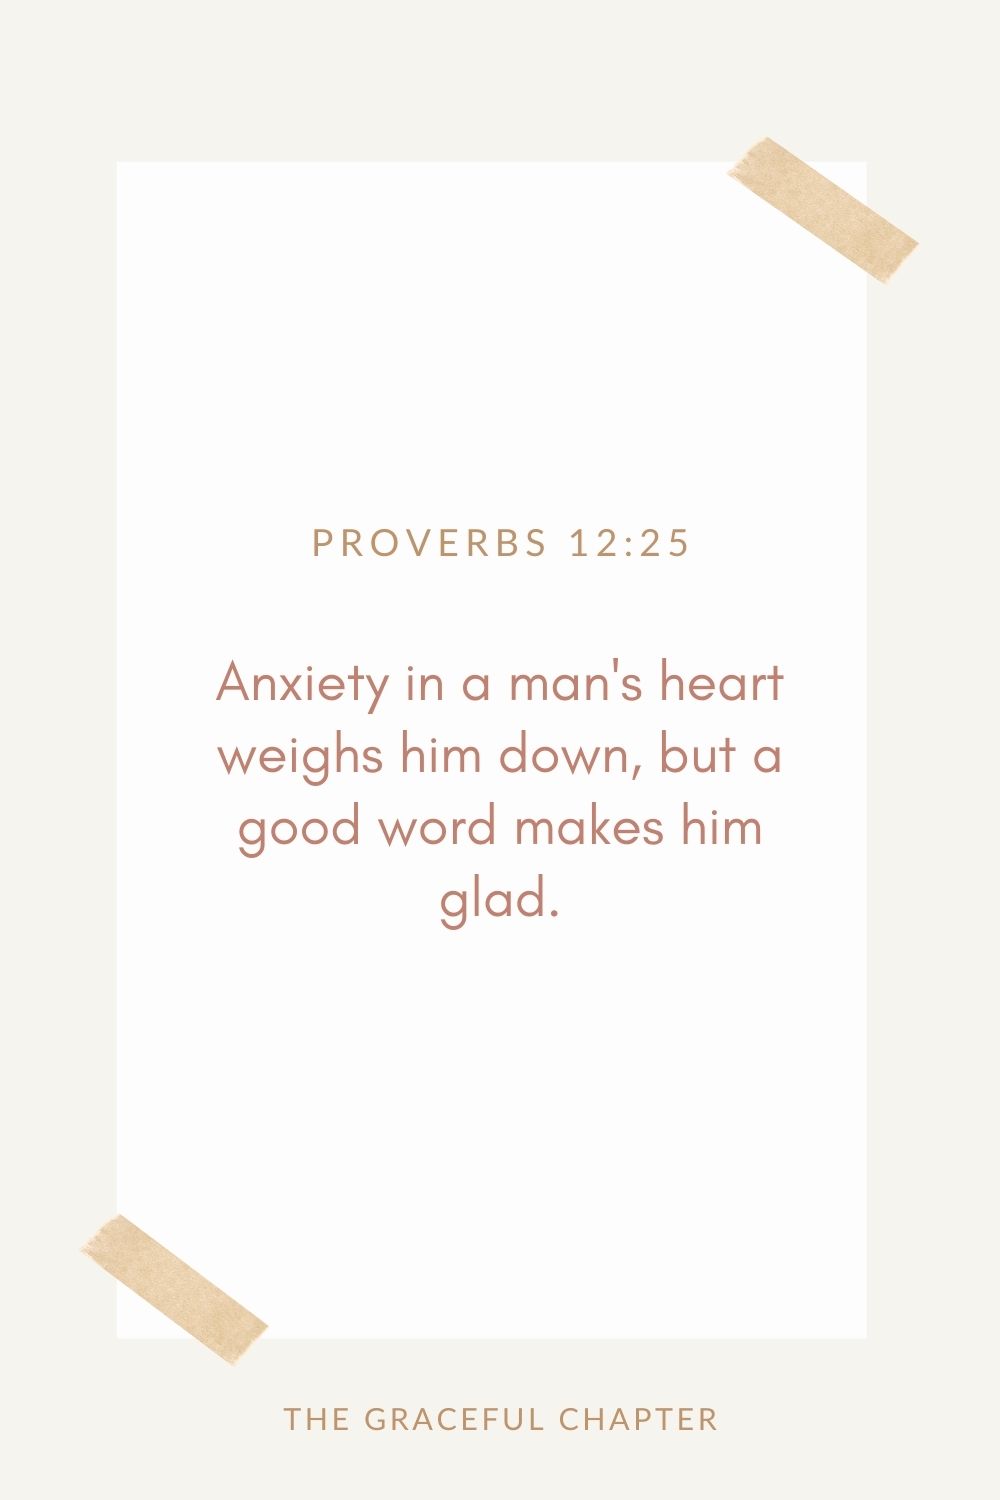 Anxiety in a man's heart weighs him down, but a good word makes him glad. Proverbs 12:25